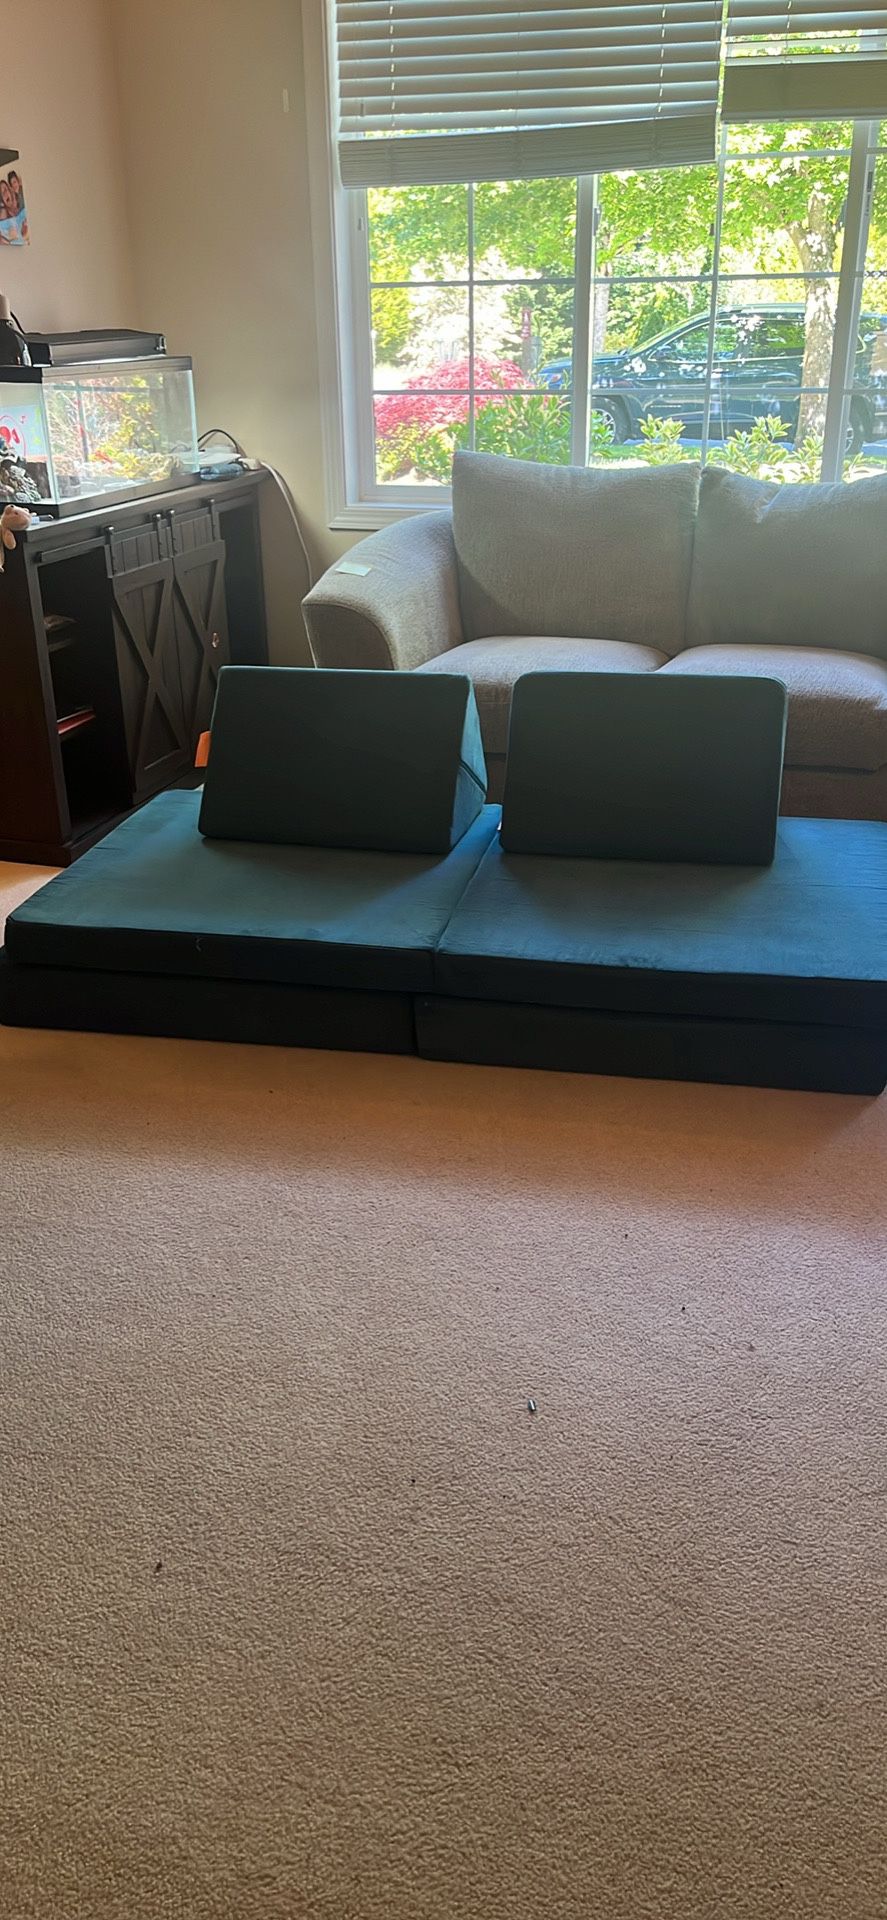 Dark Teal Nugget Couch